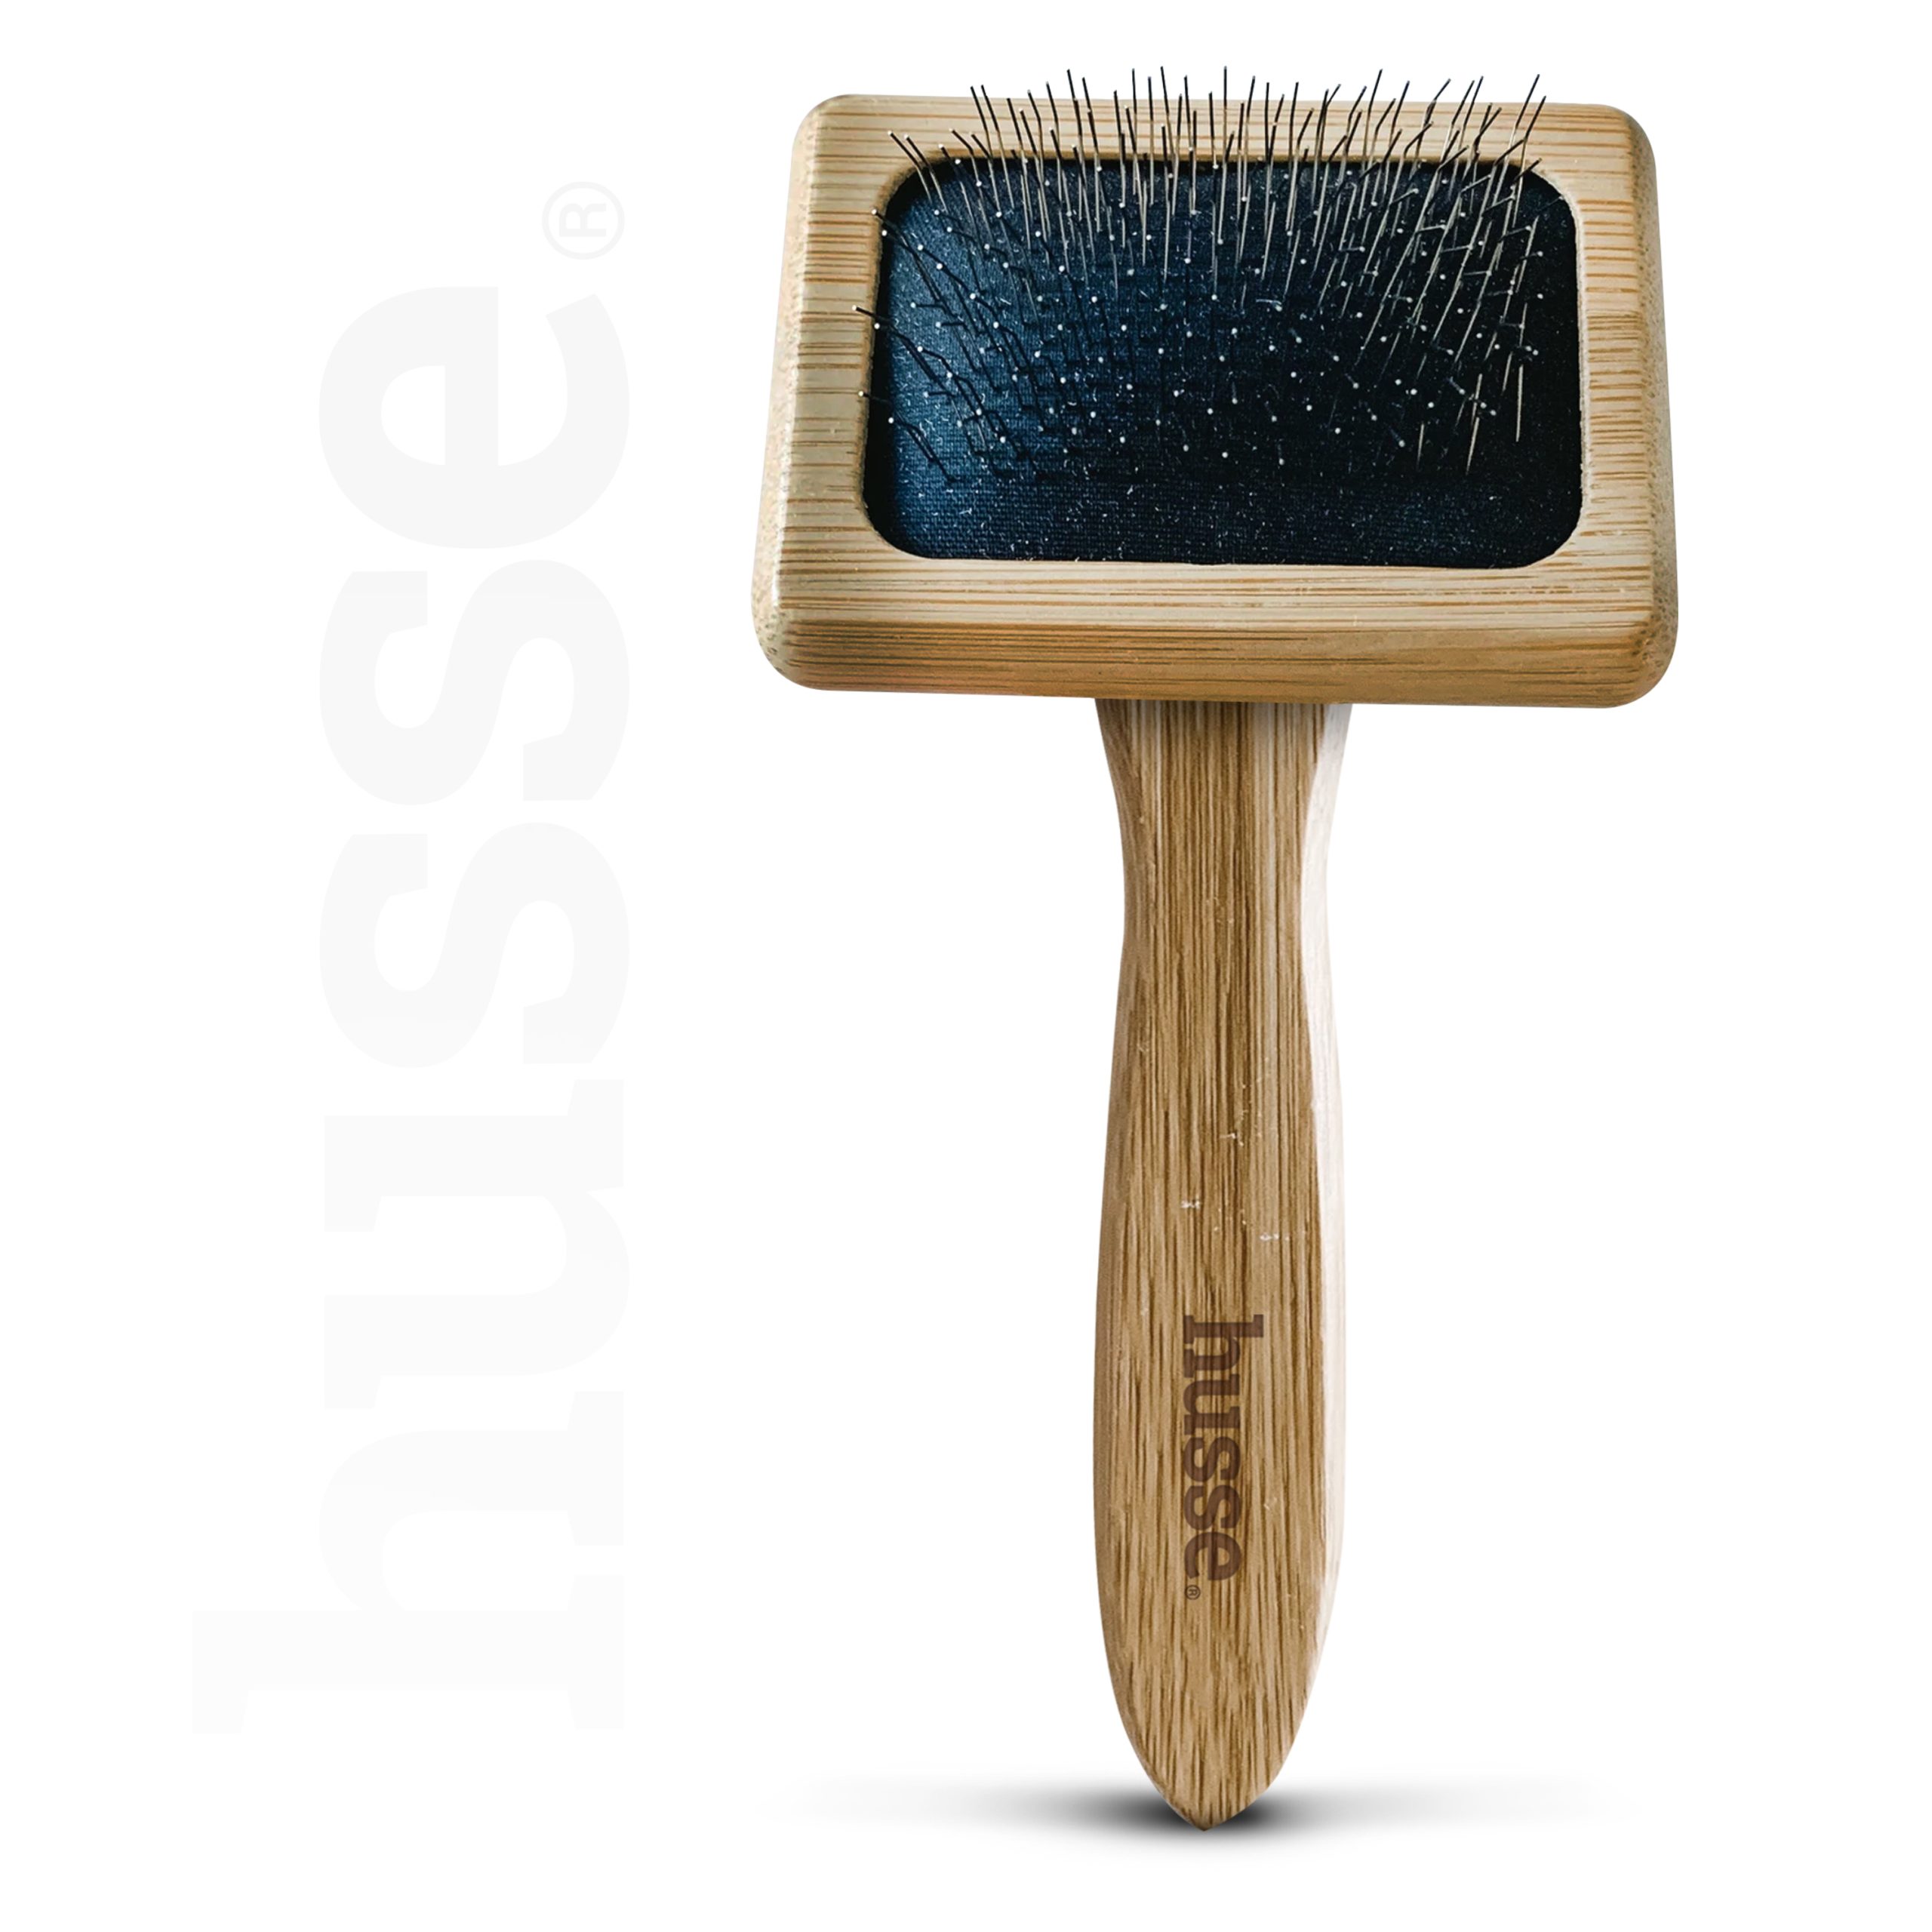 Slicker grooming brush for cats and small dogs